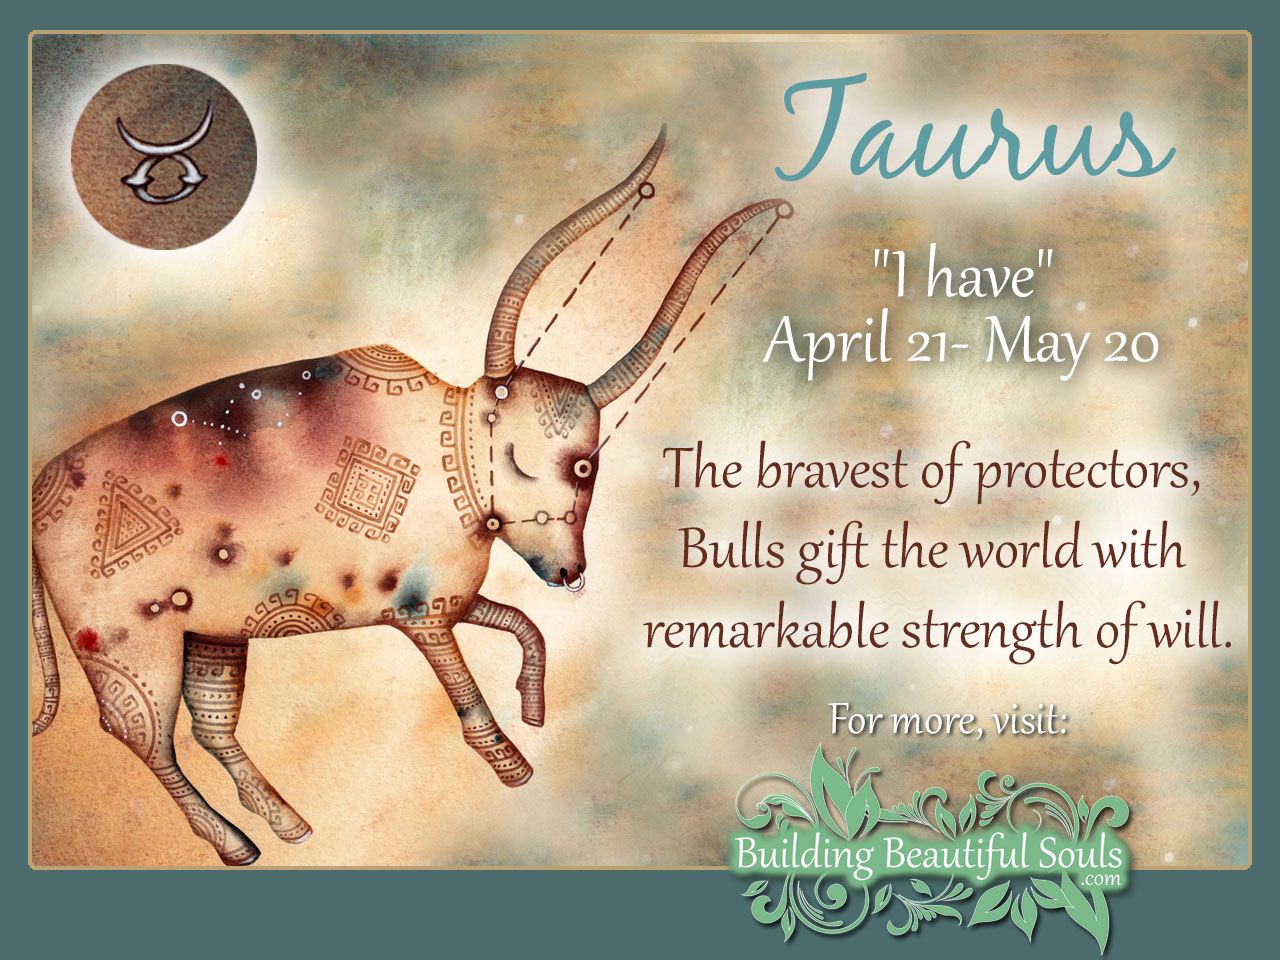 What Is Taurus?